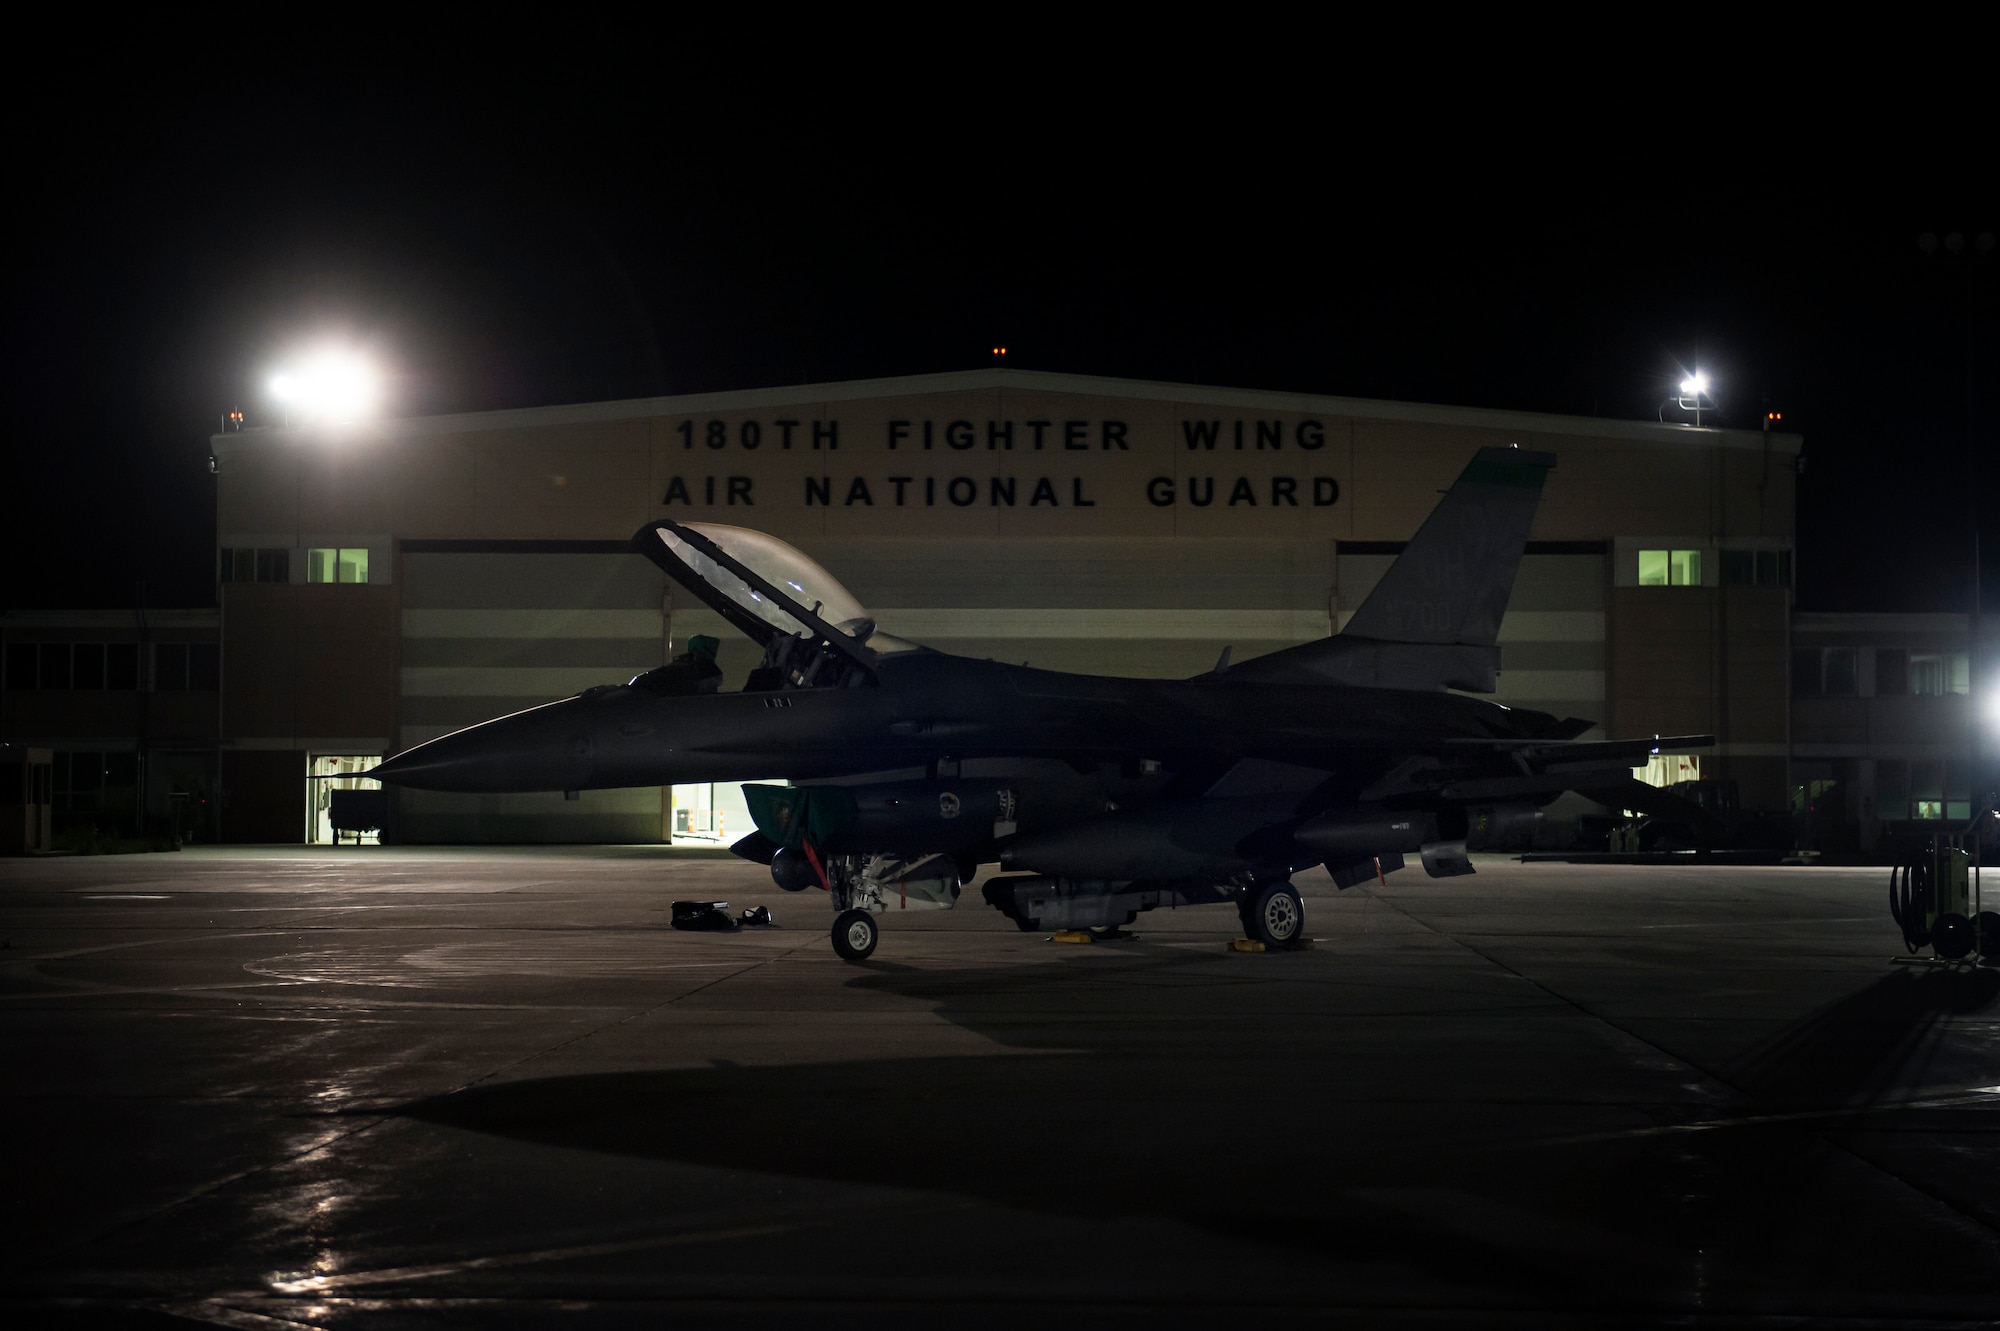 An F-16 Fighting Falcon fighter jet, assigned to the Ohio National Guard’s 180th Fighter Wing, sits ready on the flightline in the early morning hours, O.t. 12, 2020, before departing from the 180FW, in Swanton, Ohio, for an Aerospace Expeditionary Force deployment.